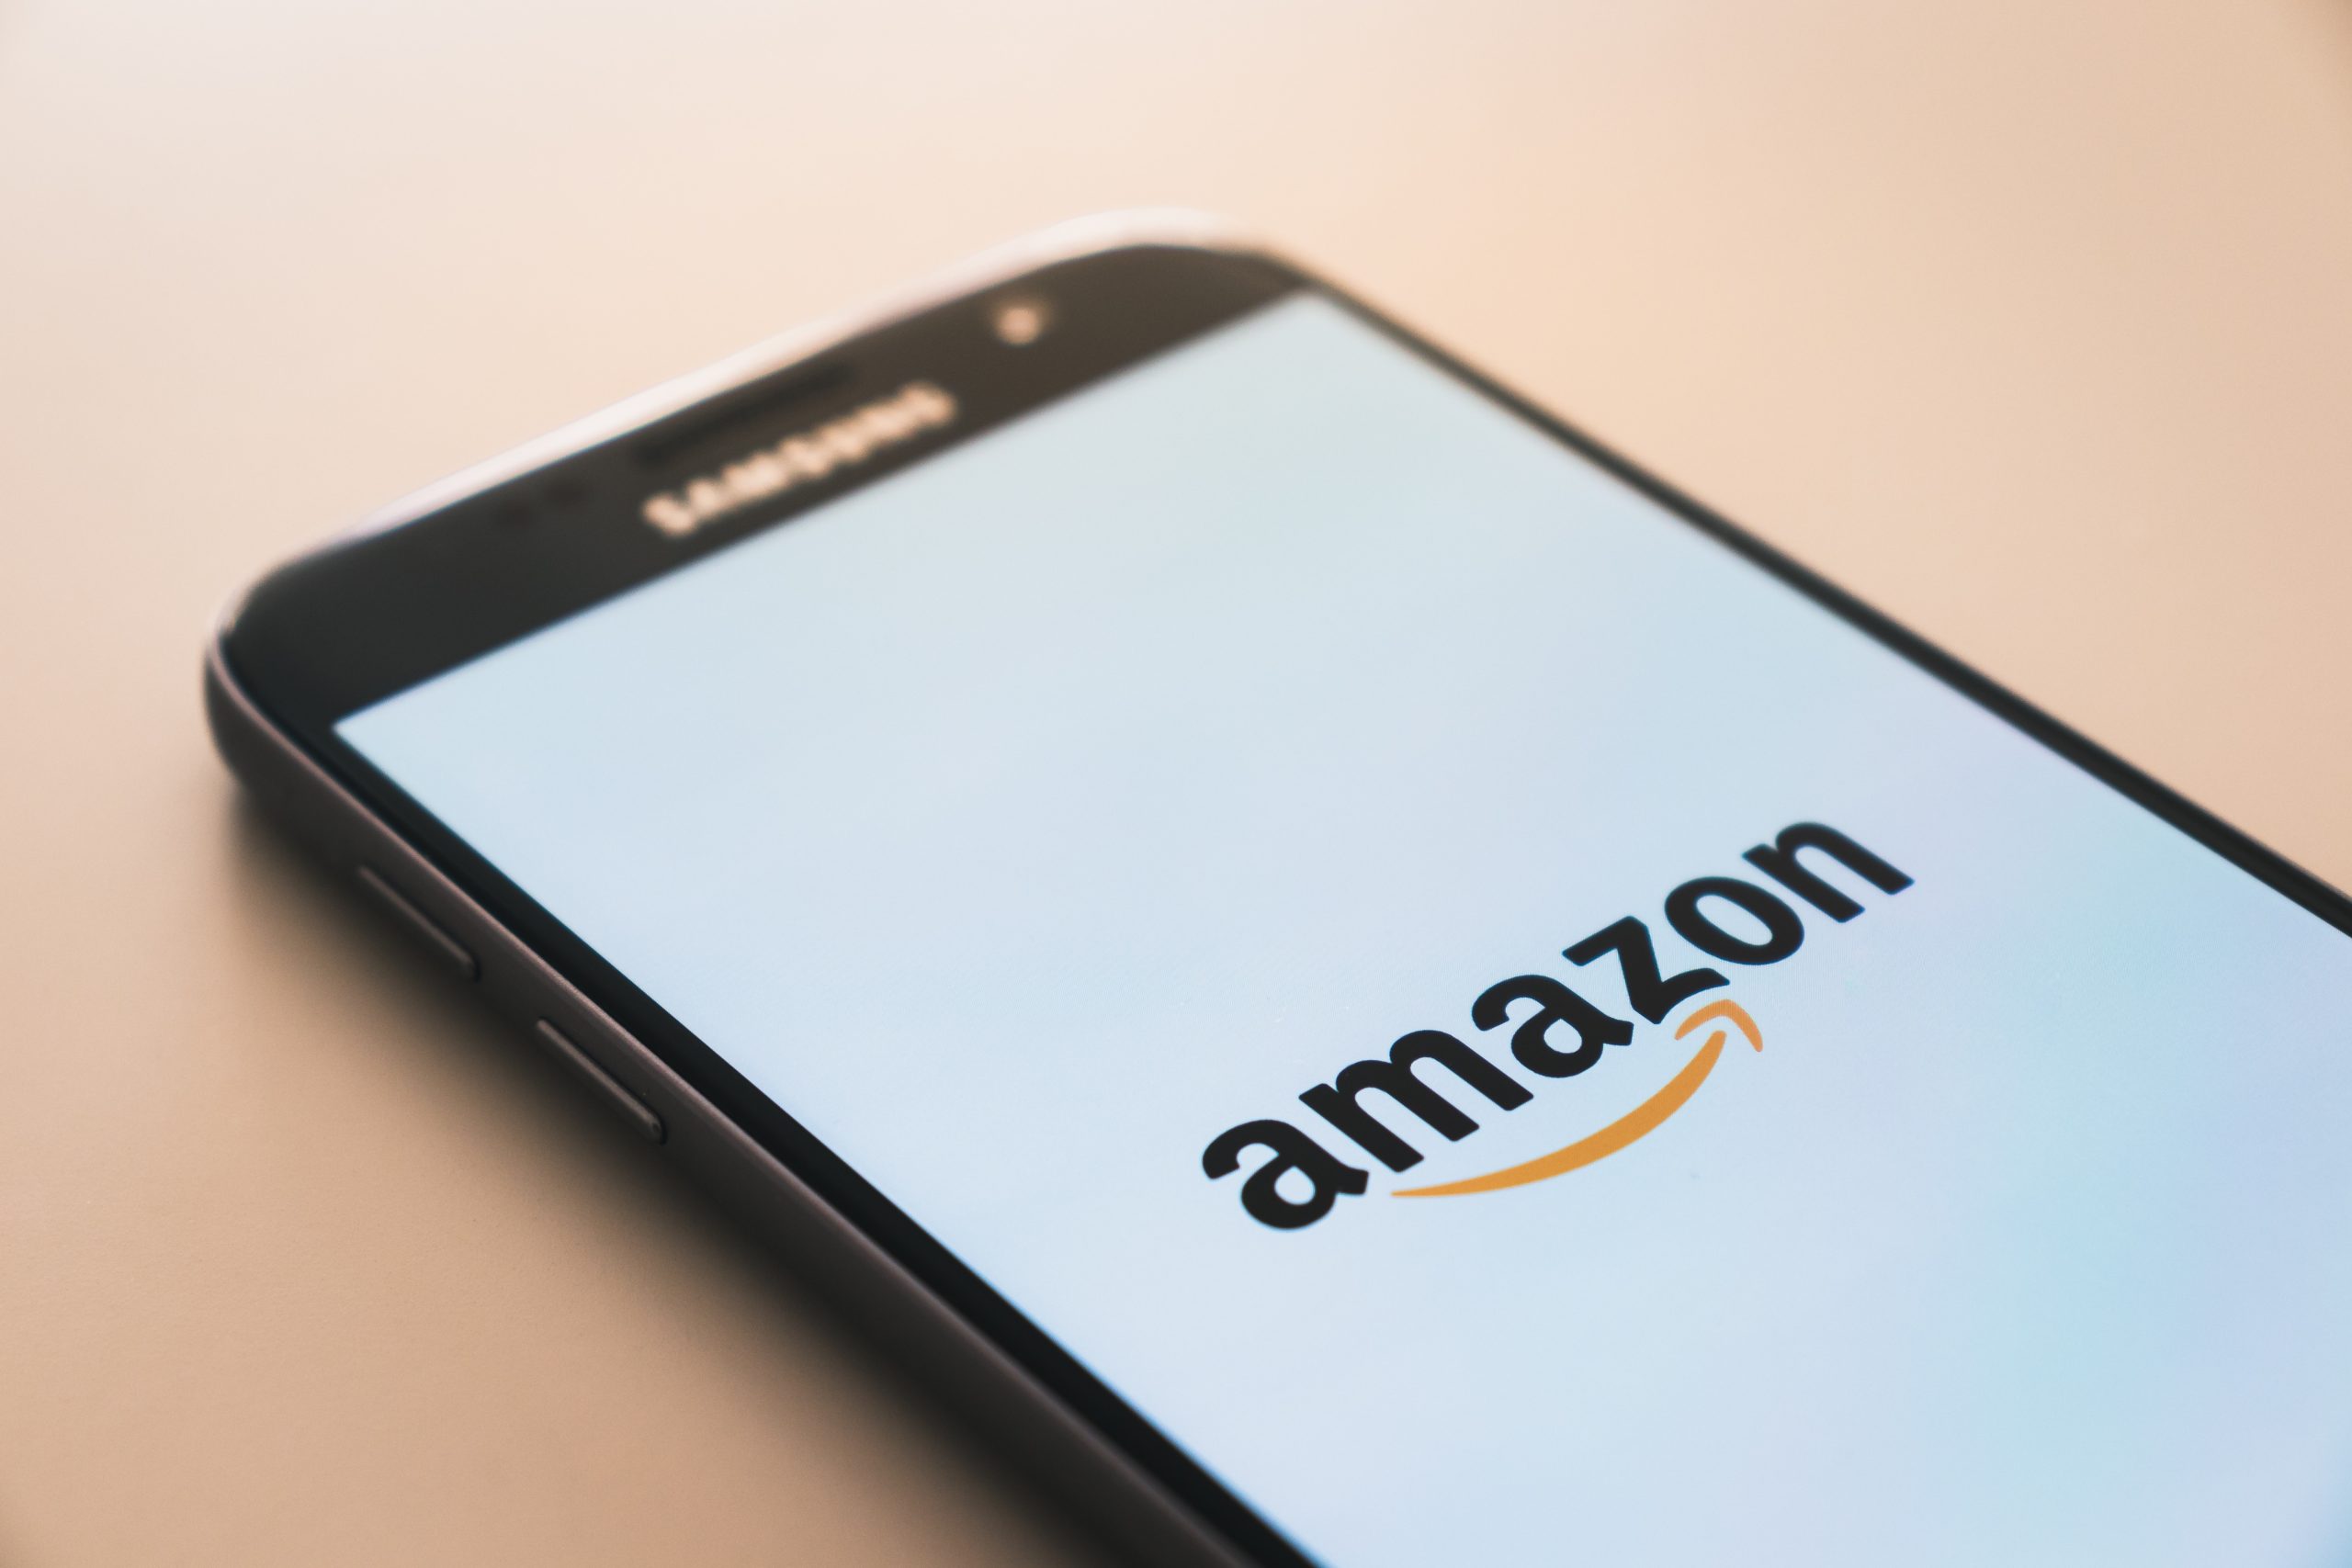 Qatar residents can now order from Amazon through UAE branch